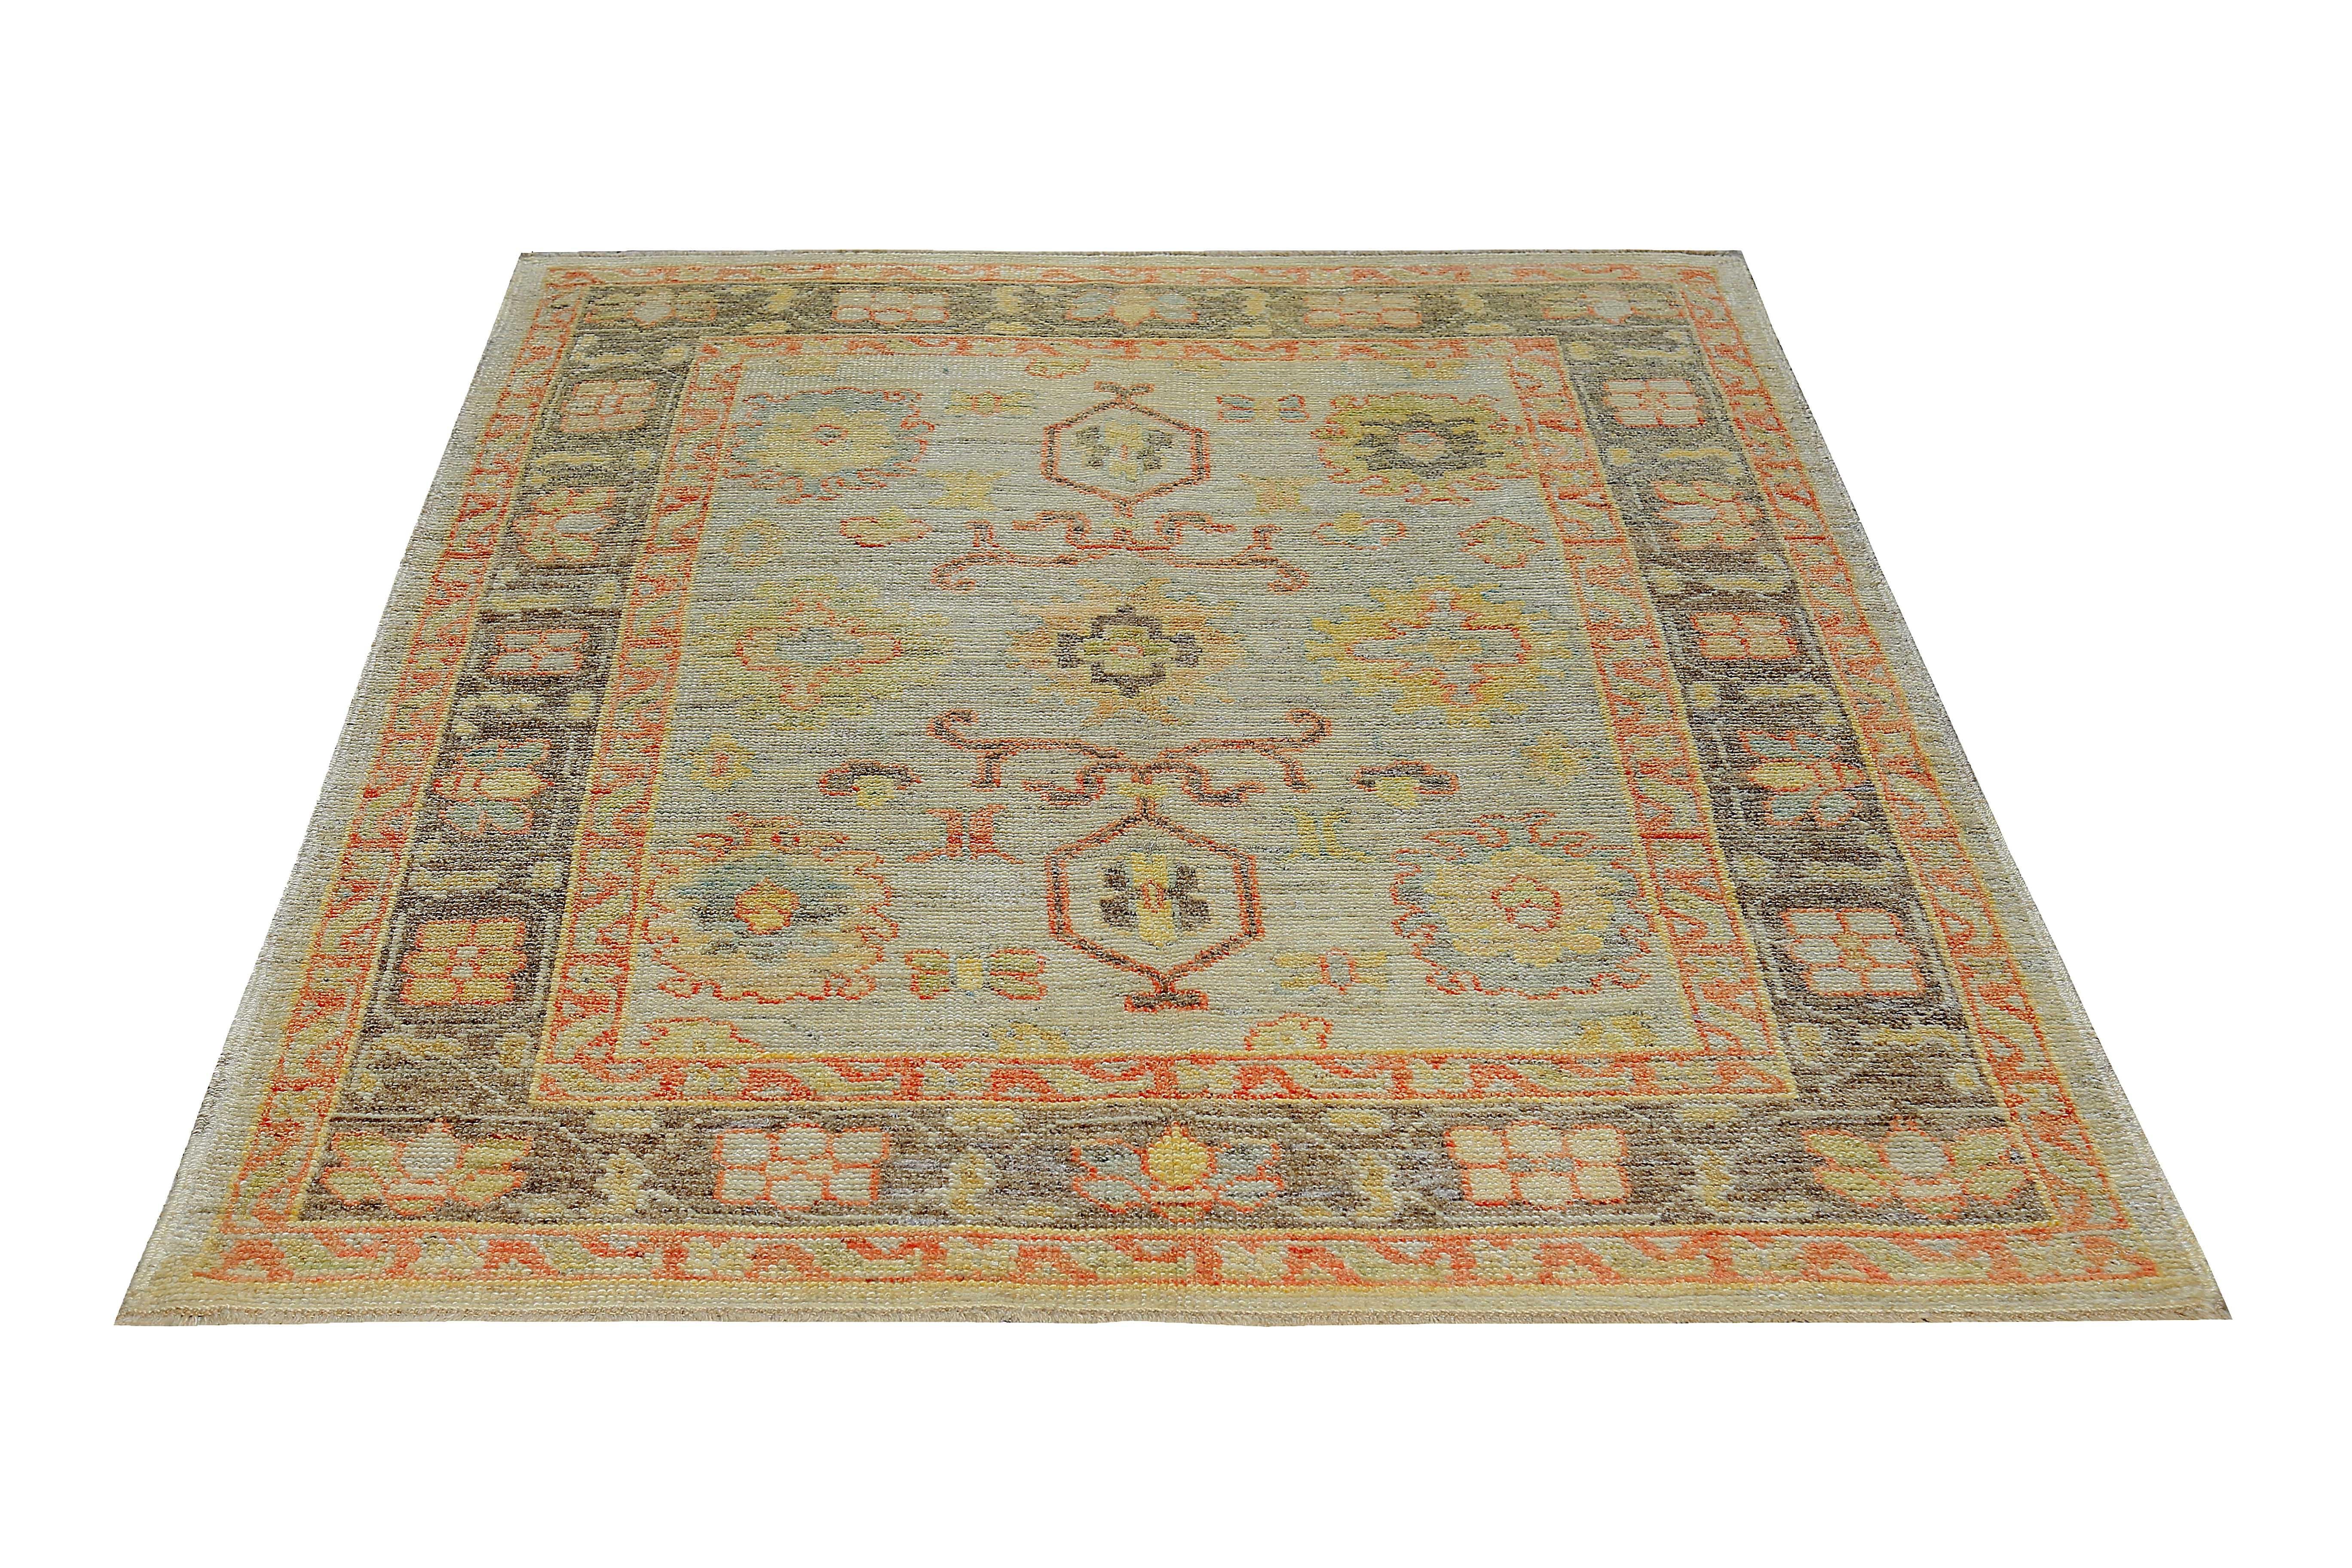 New Turkish rug made of handwoven sheep’s wool of the finest quality. It’s colored with organic vegetable dyes that are certified safe for humans and pets alike. It features orange and yellow floral patterns on a fine ivory field bordered by a rich